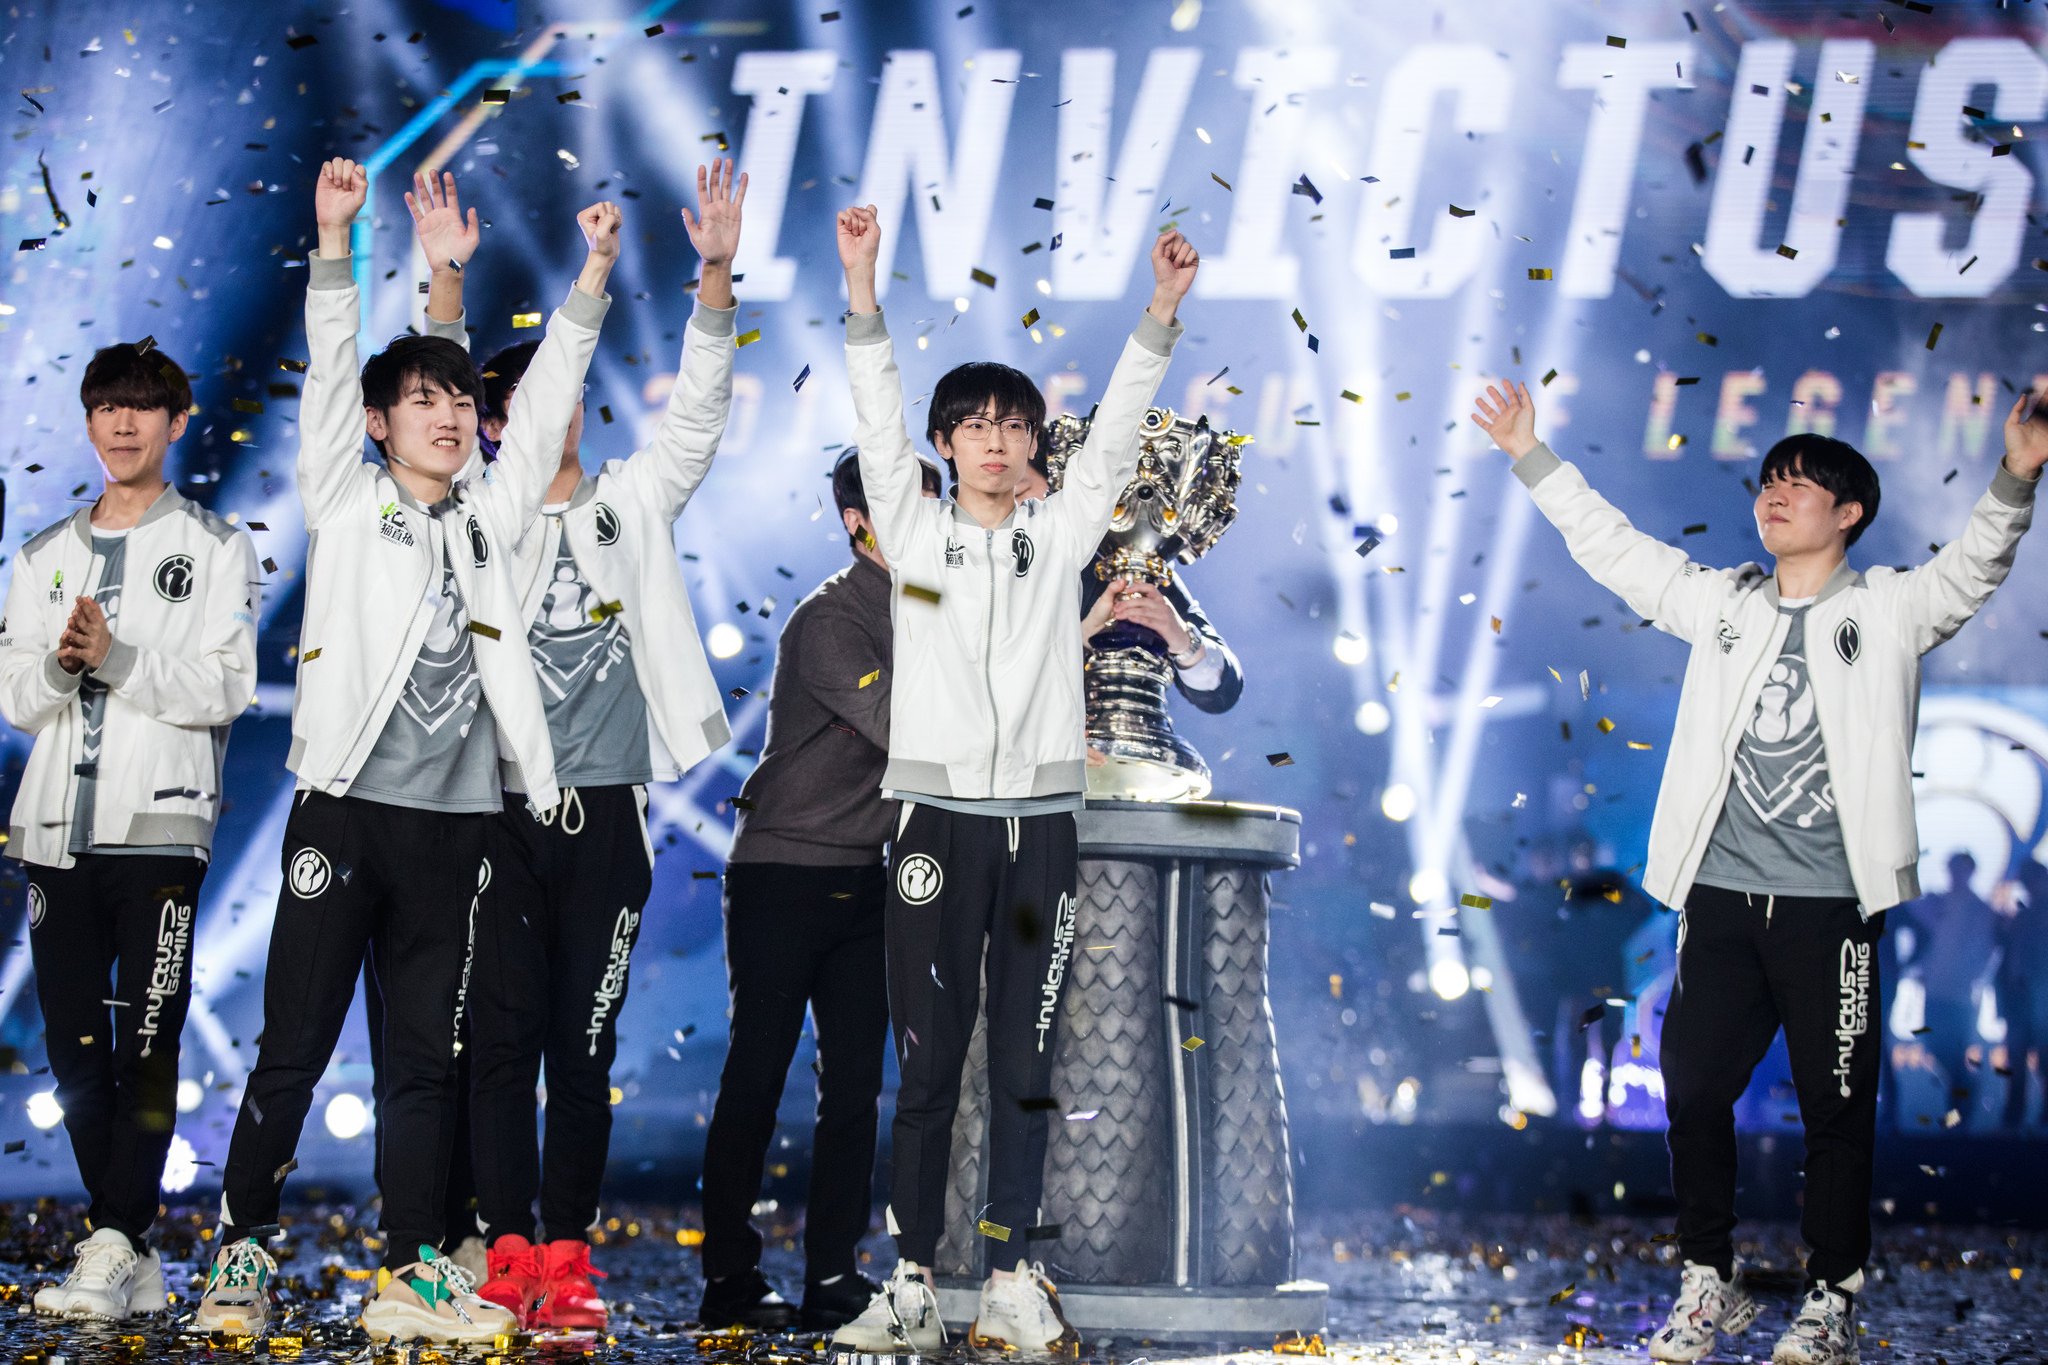 signs 5-year, $144 million deal with LPL - Esports